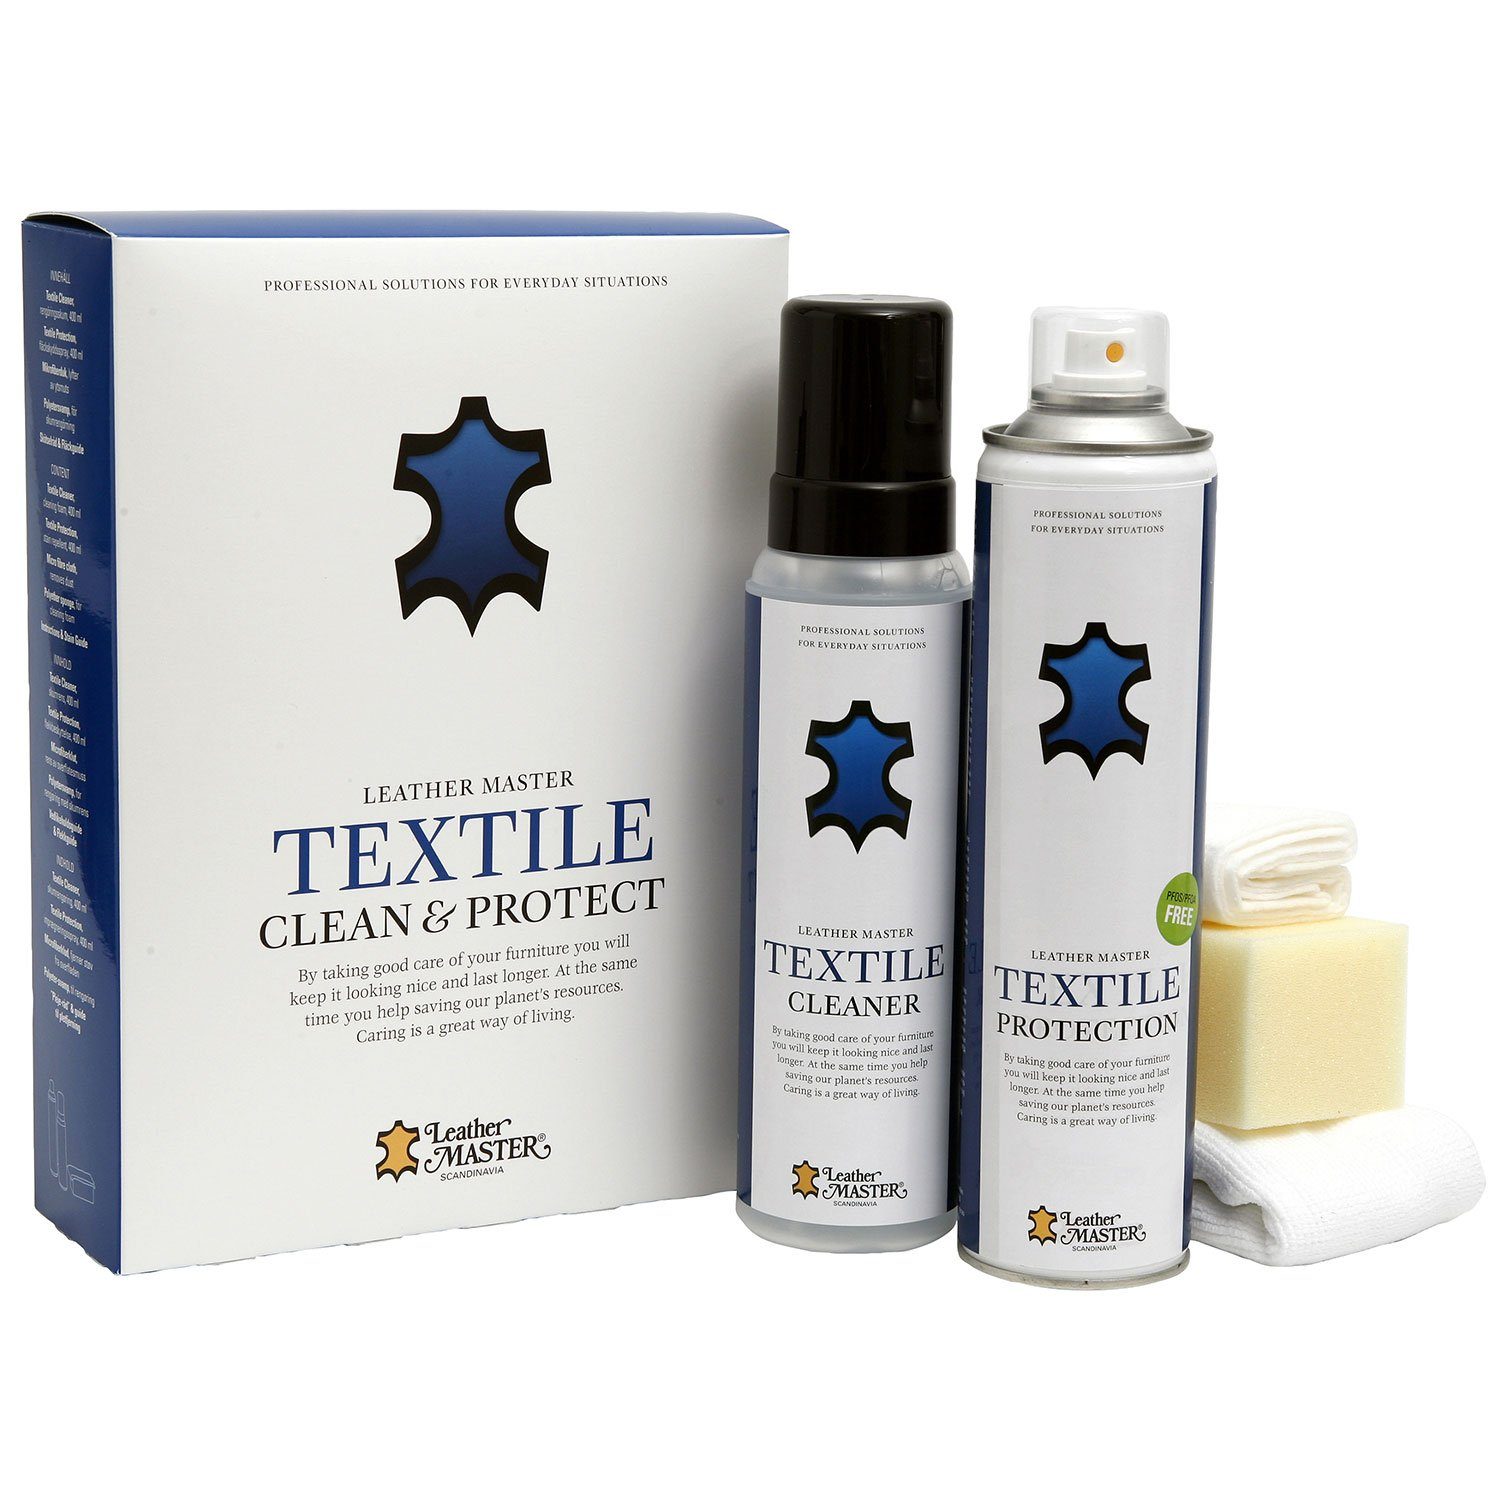 Textile Clean & Protect från Leather Master.